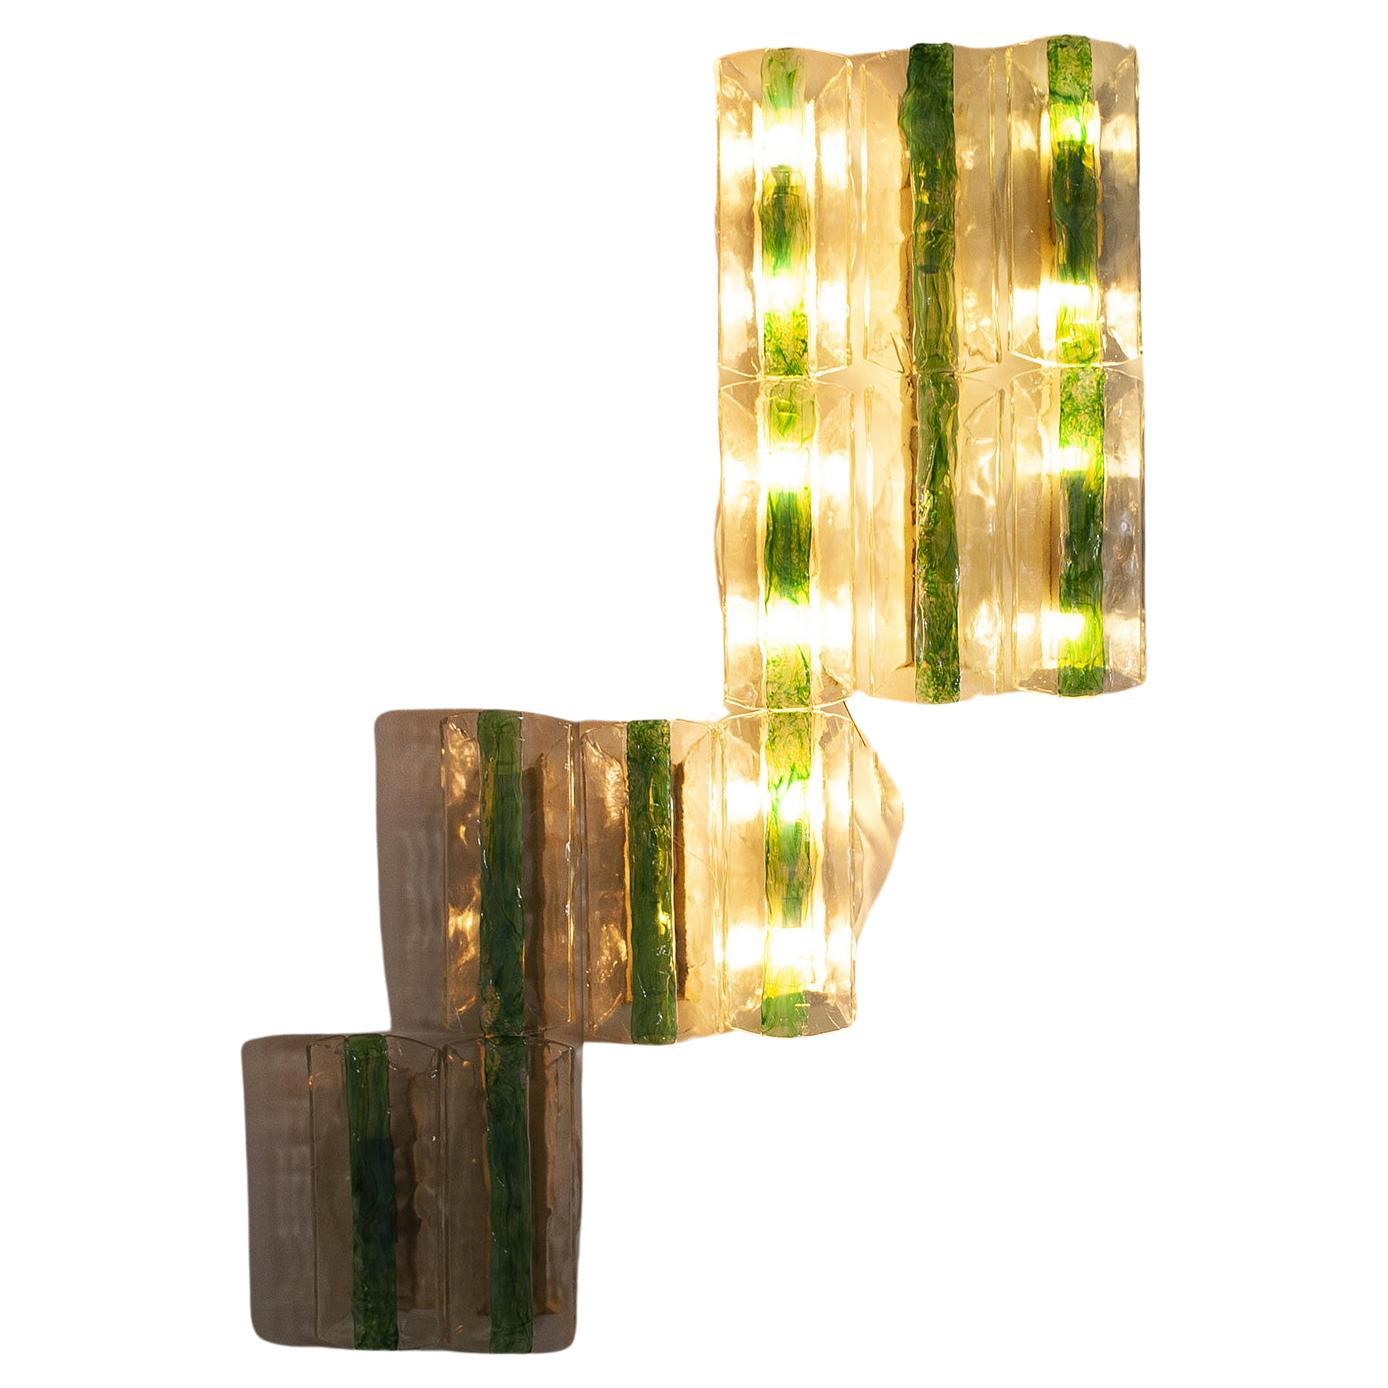 Set consisting of 13 elements by Venetian glassmaker A.V. Mazzega design Carlo Nason. The transparent textured glass has a strip of fused, emerald green, opalescent glass applied to the center of each sconce, except in two from the fully transparent